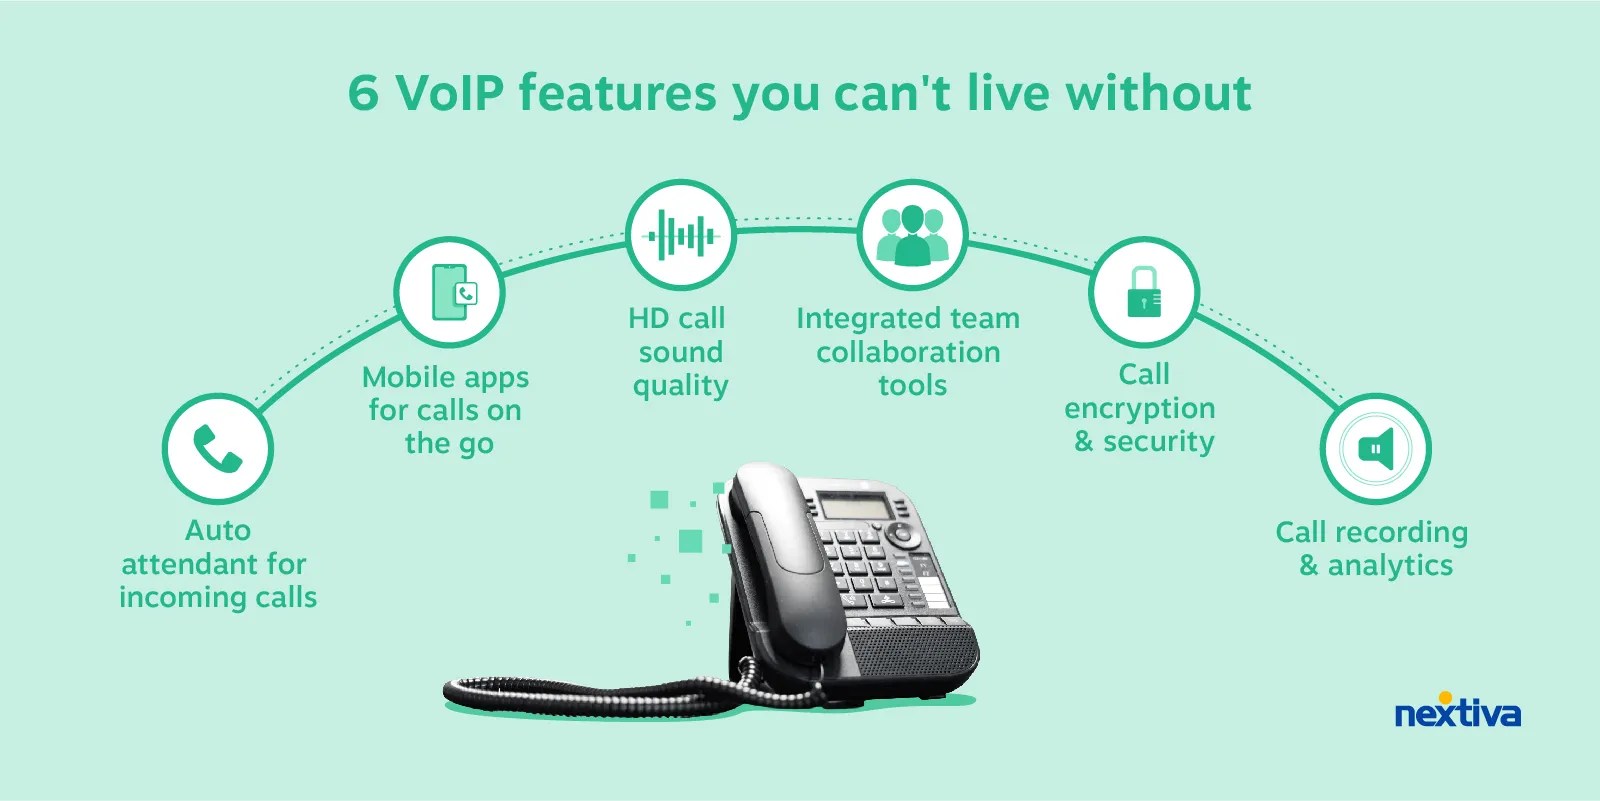 Key VoIP features for businesses 